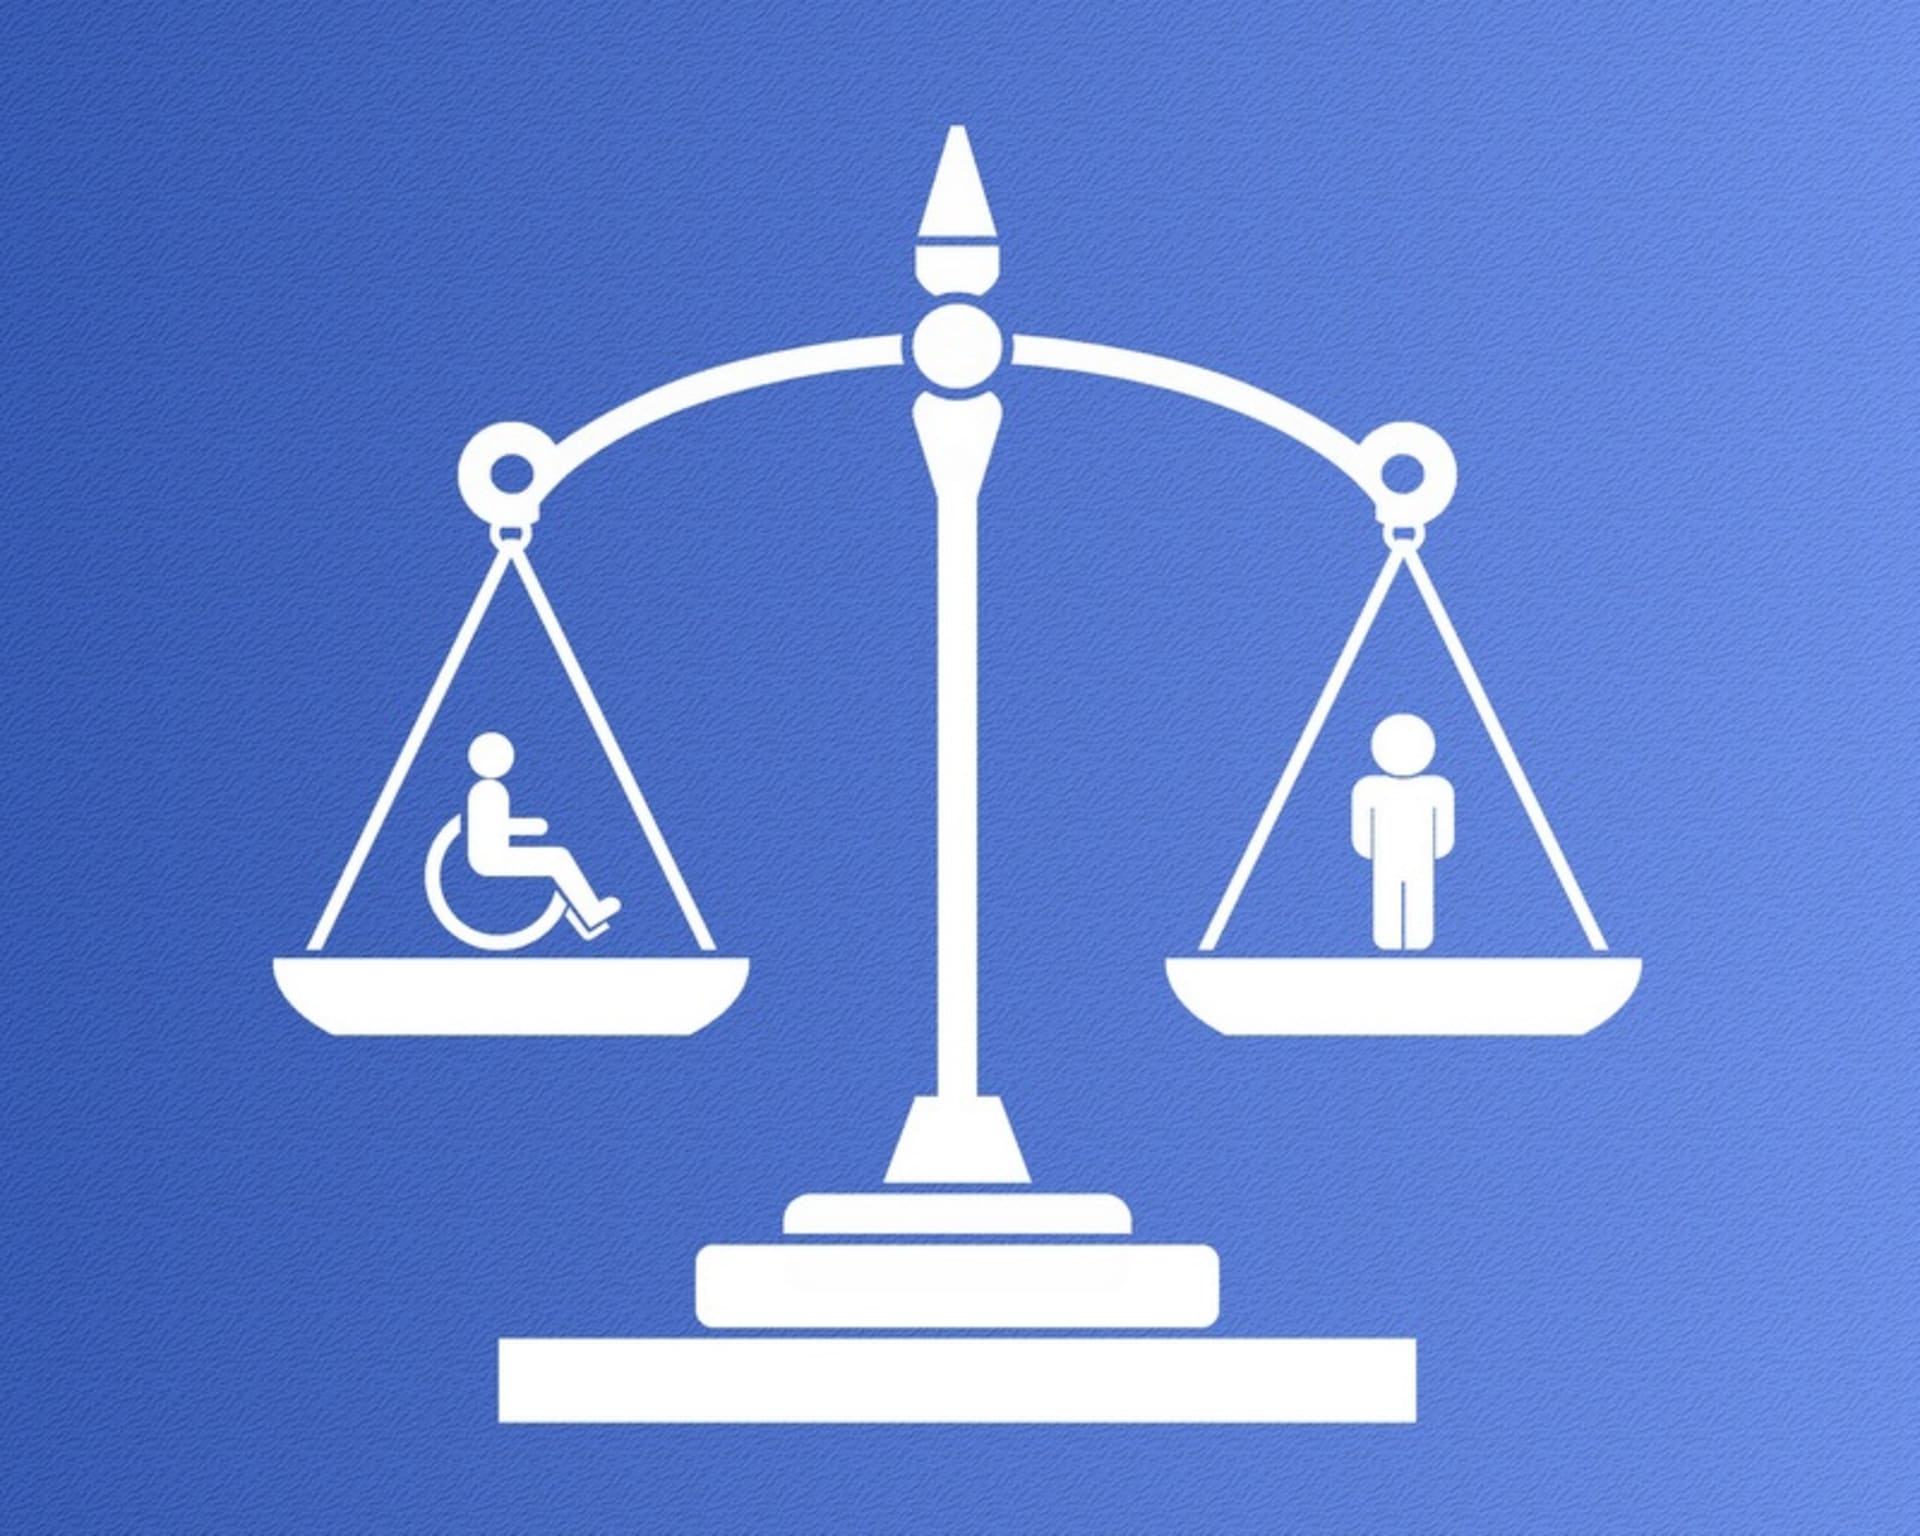 phd in disability law